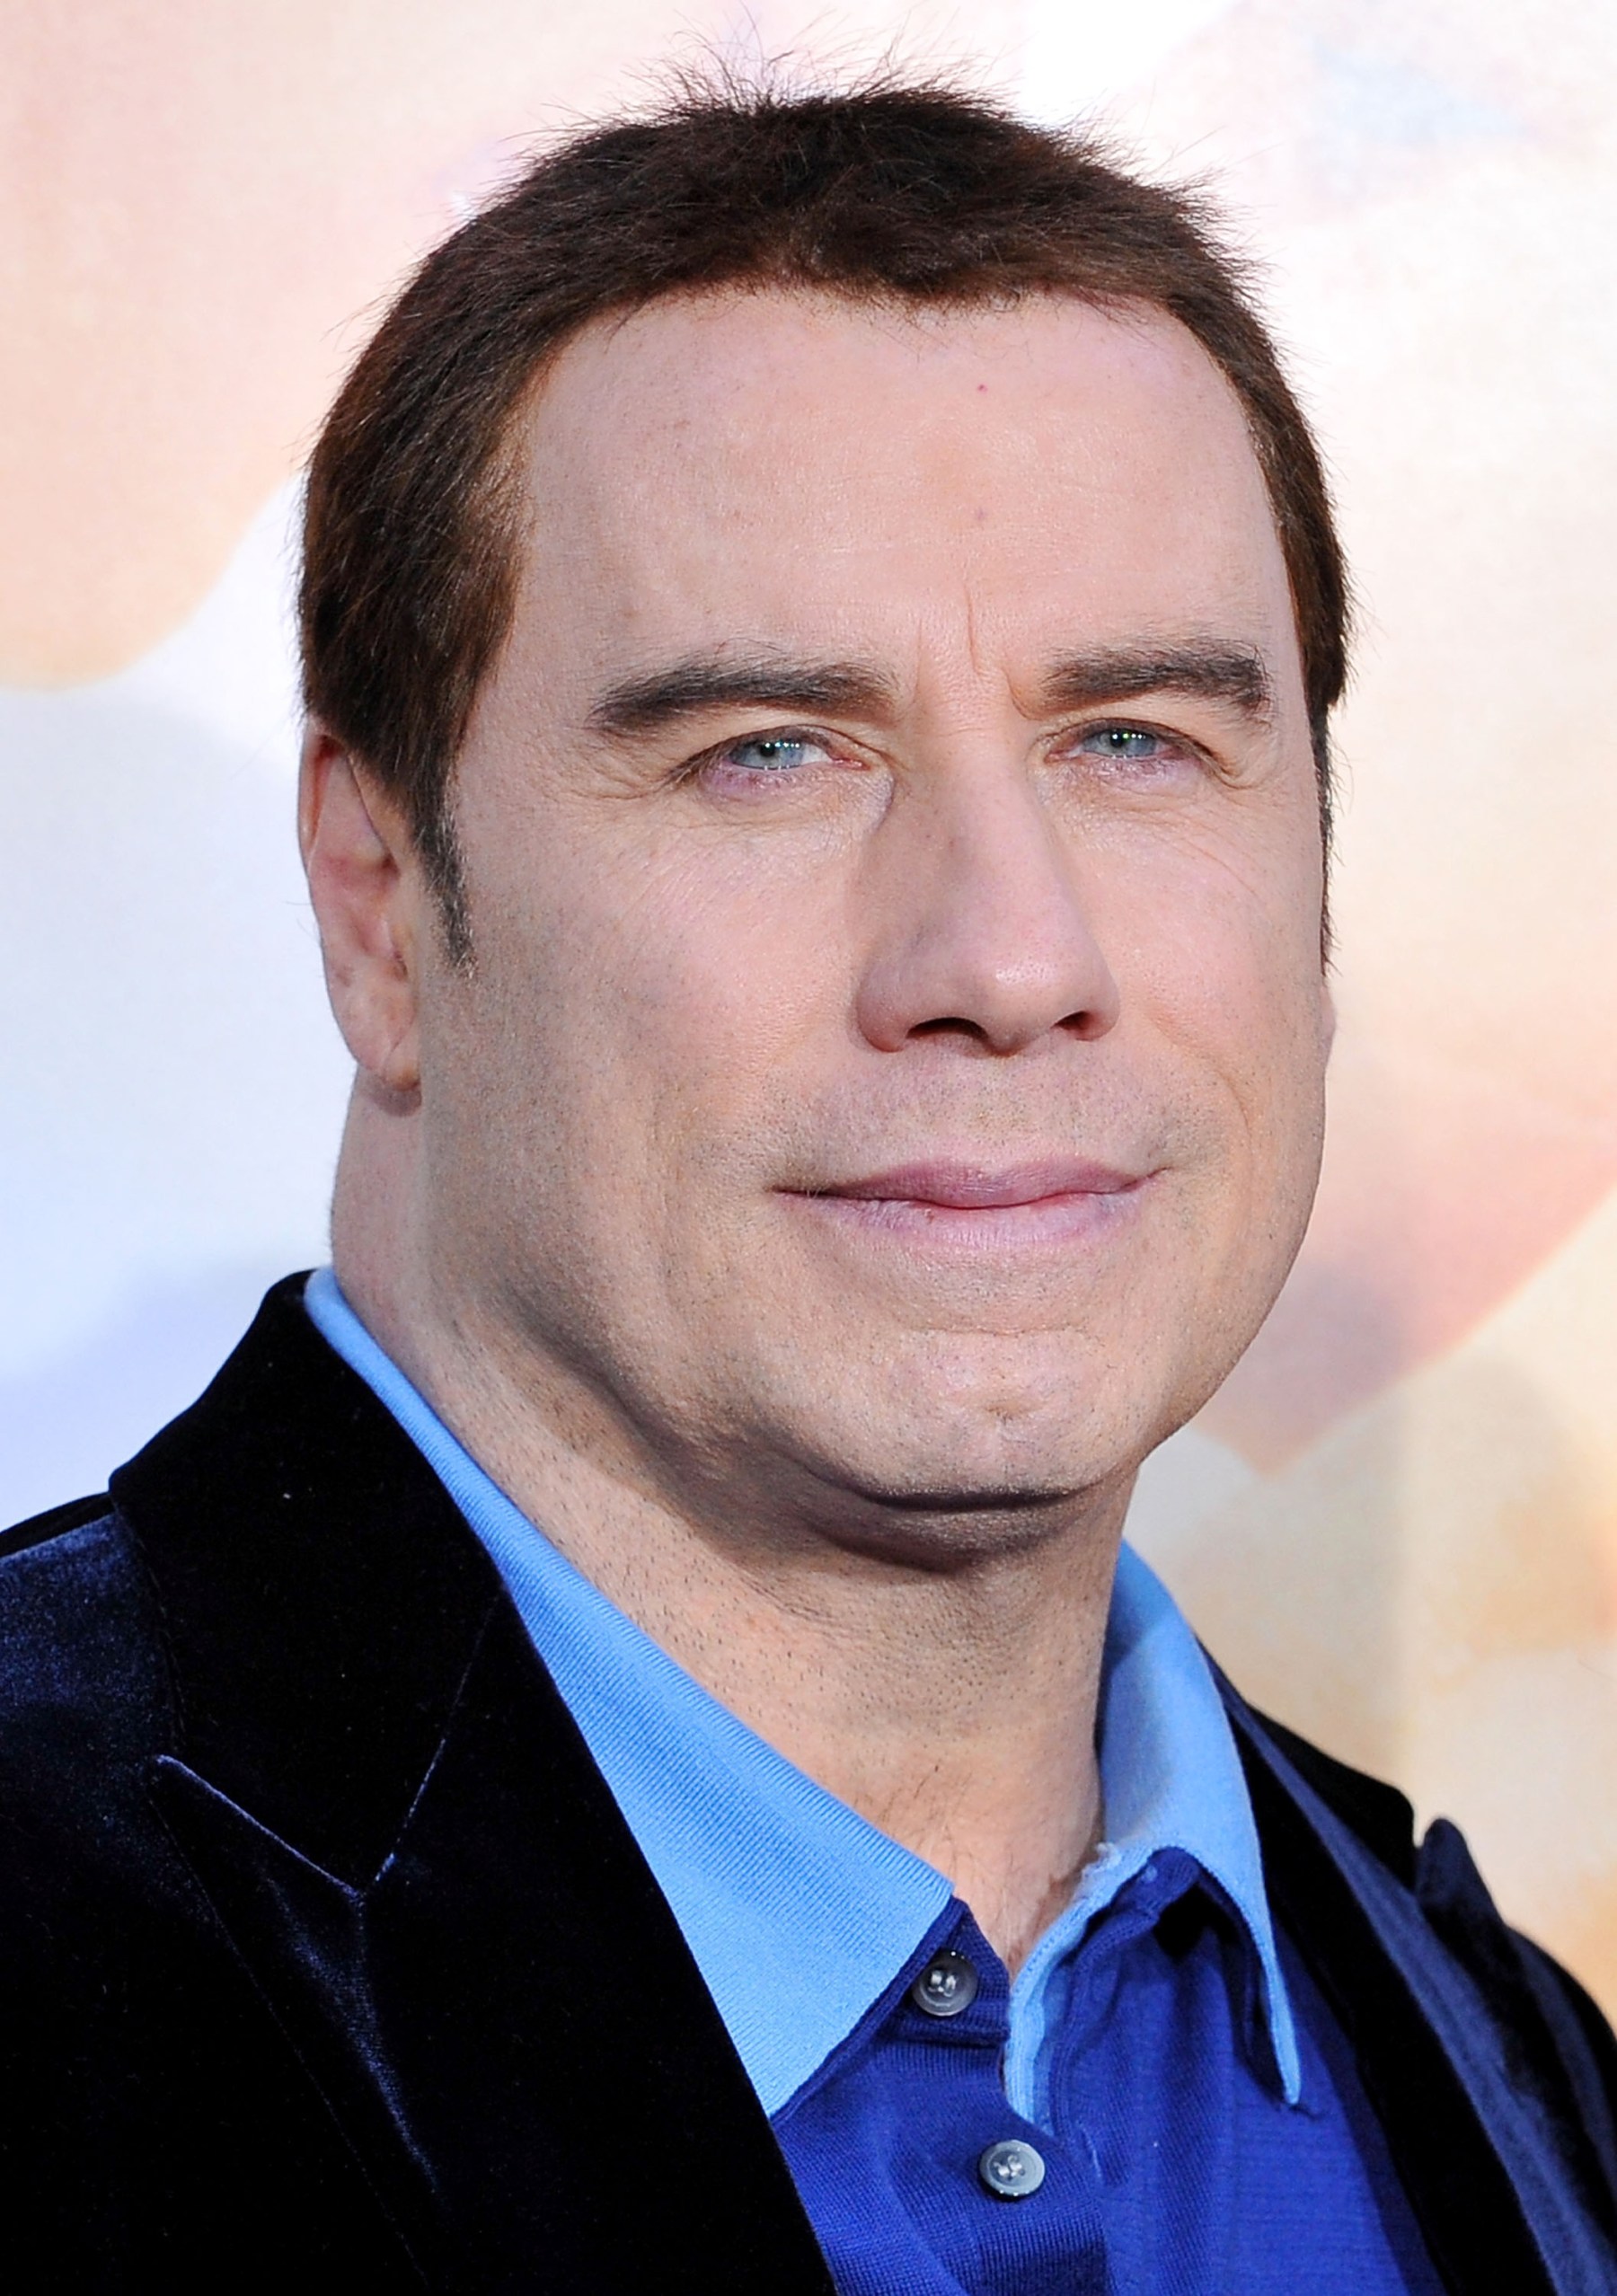 John Travolta Then and Now Photos of the Actor's Transformation